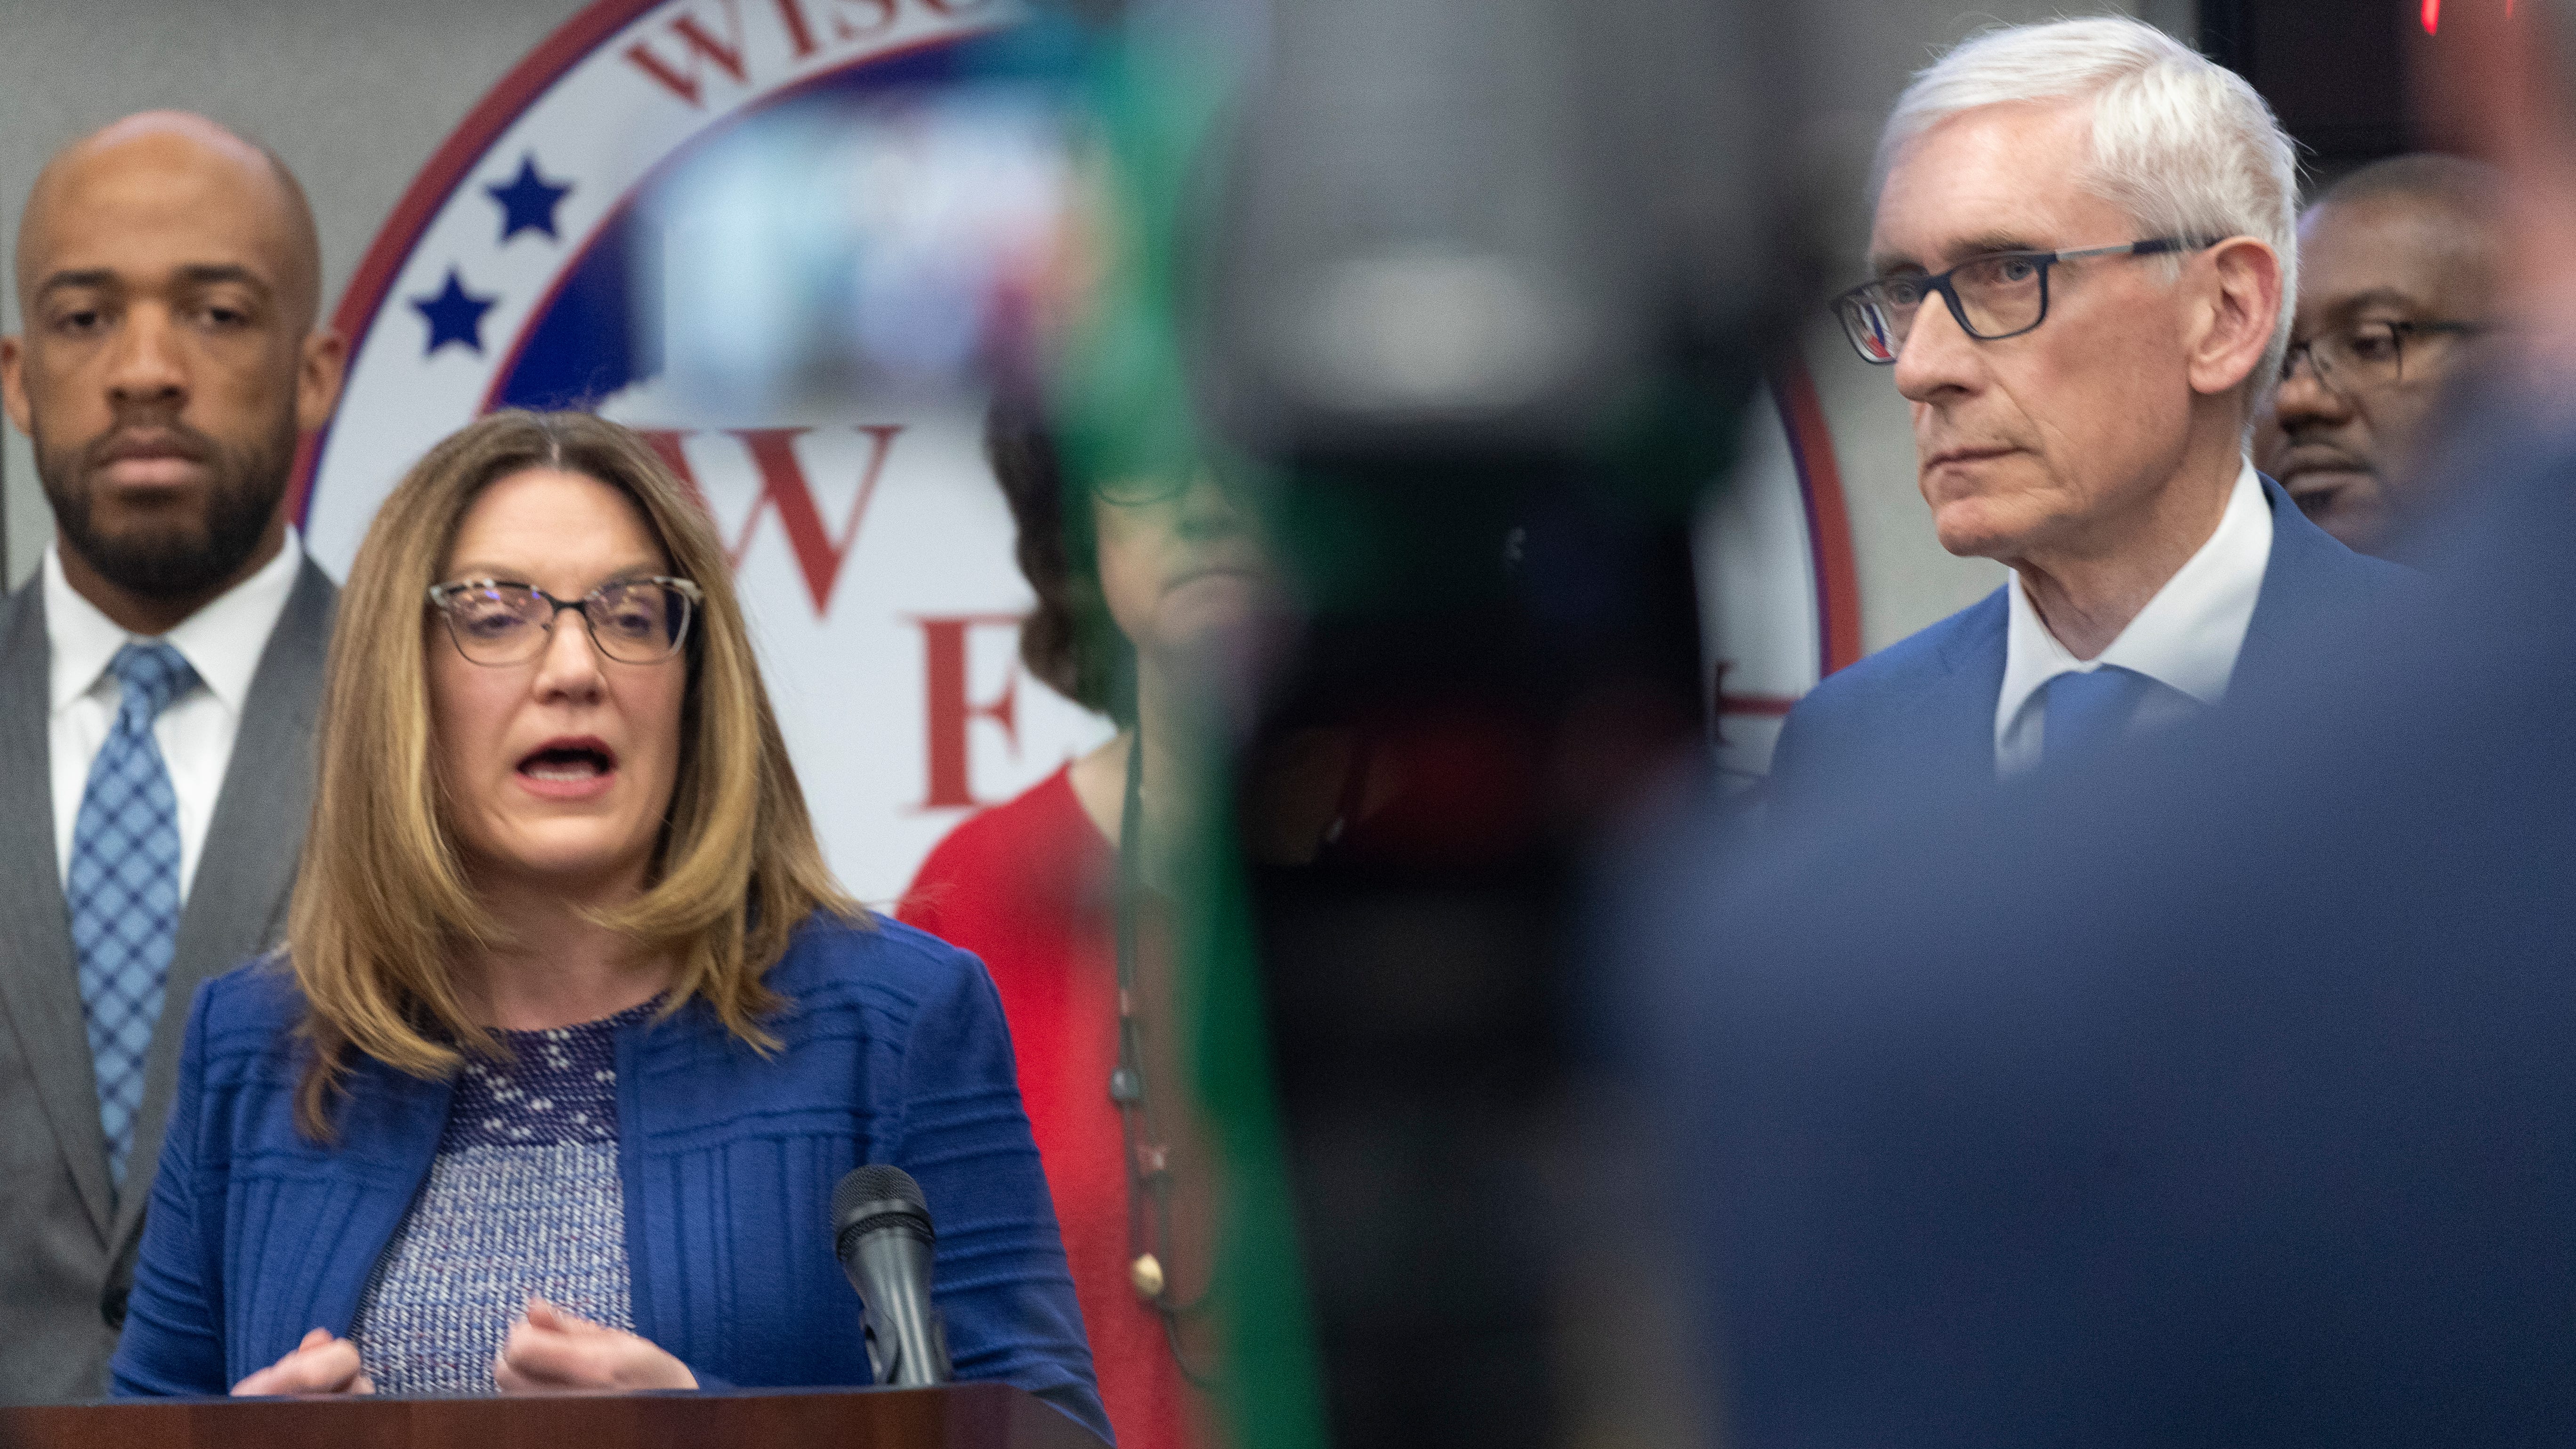 Wisconsin Department of Health Services (DHS) Secretary  Andrea Palm, left,  speaks as Gov. Tony Evers looks on at a briefing to discuss updates to the state's response to the coronavirus pandemic.